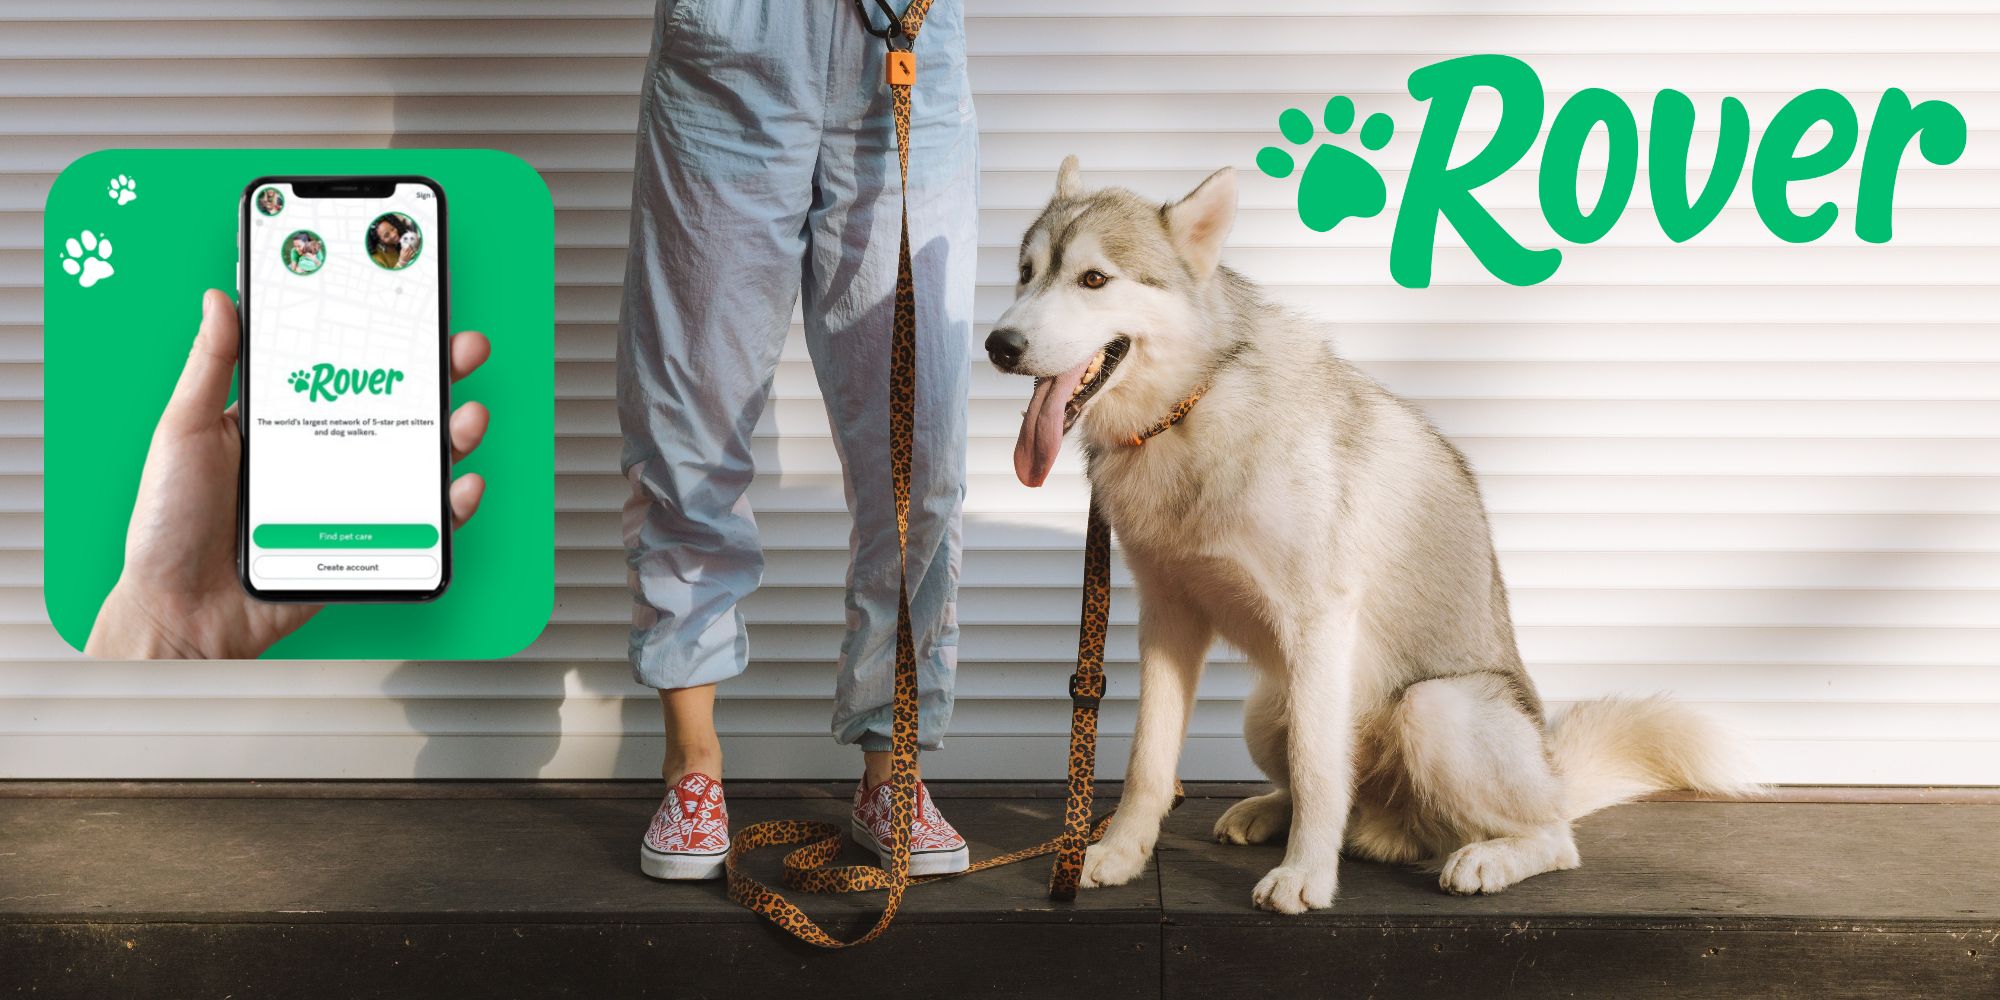 A persons legs are pictured. Next to them is a white and grey Husky dog. The green Rover app logo is above them. 